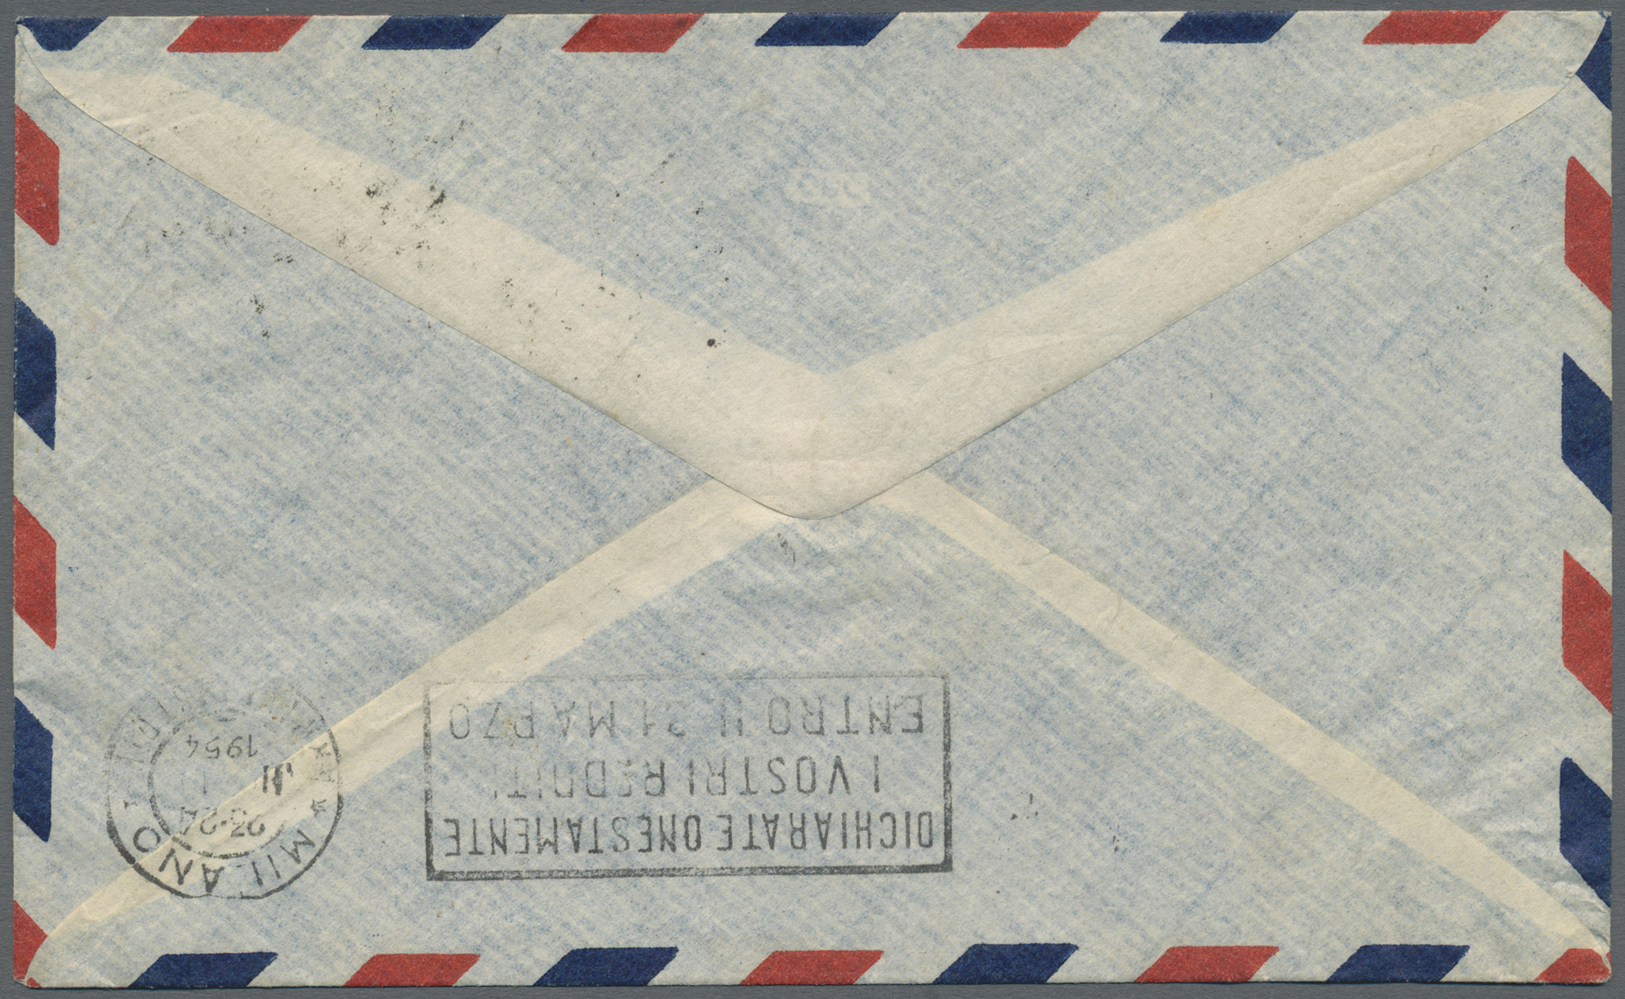 Br China - Volksrepublik: 1950/53, Wall Paintings II (S6) Set Etc. Tied "Shanghai Branch 23 54.3.9" To Air Mail Cover To - Other & Unclassified